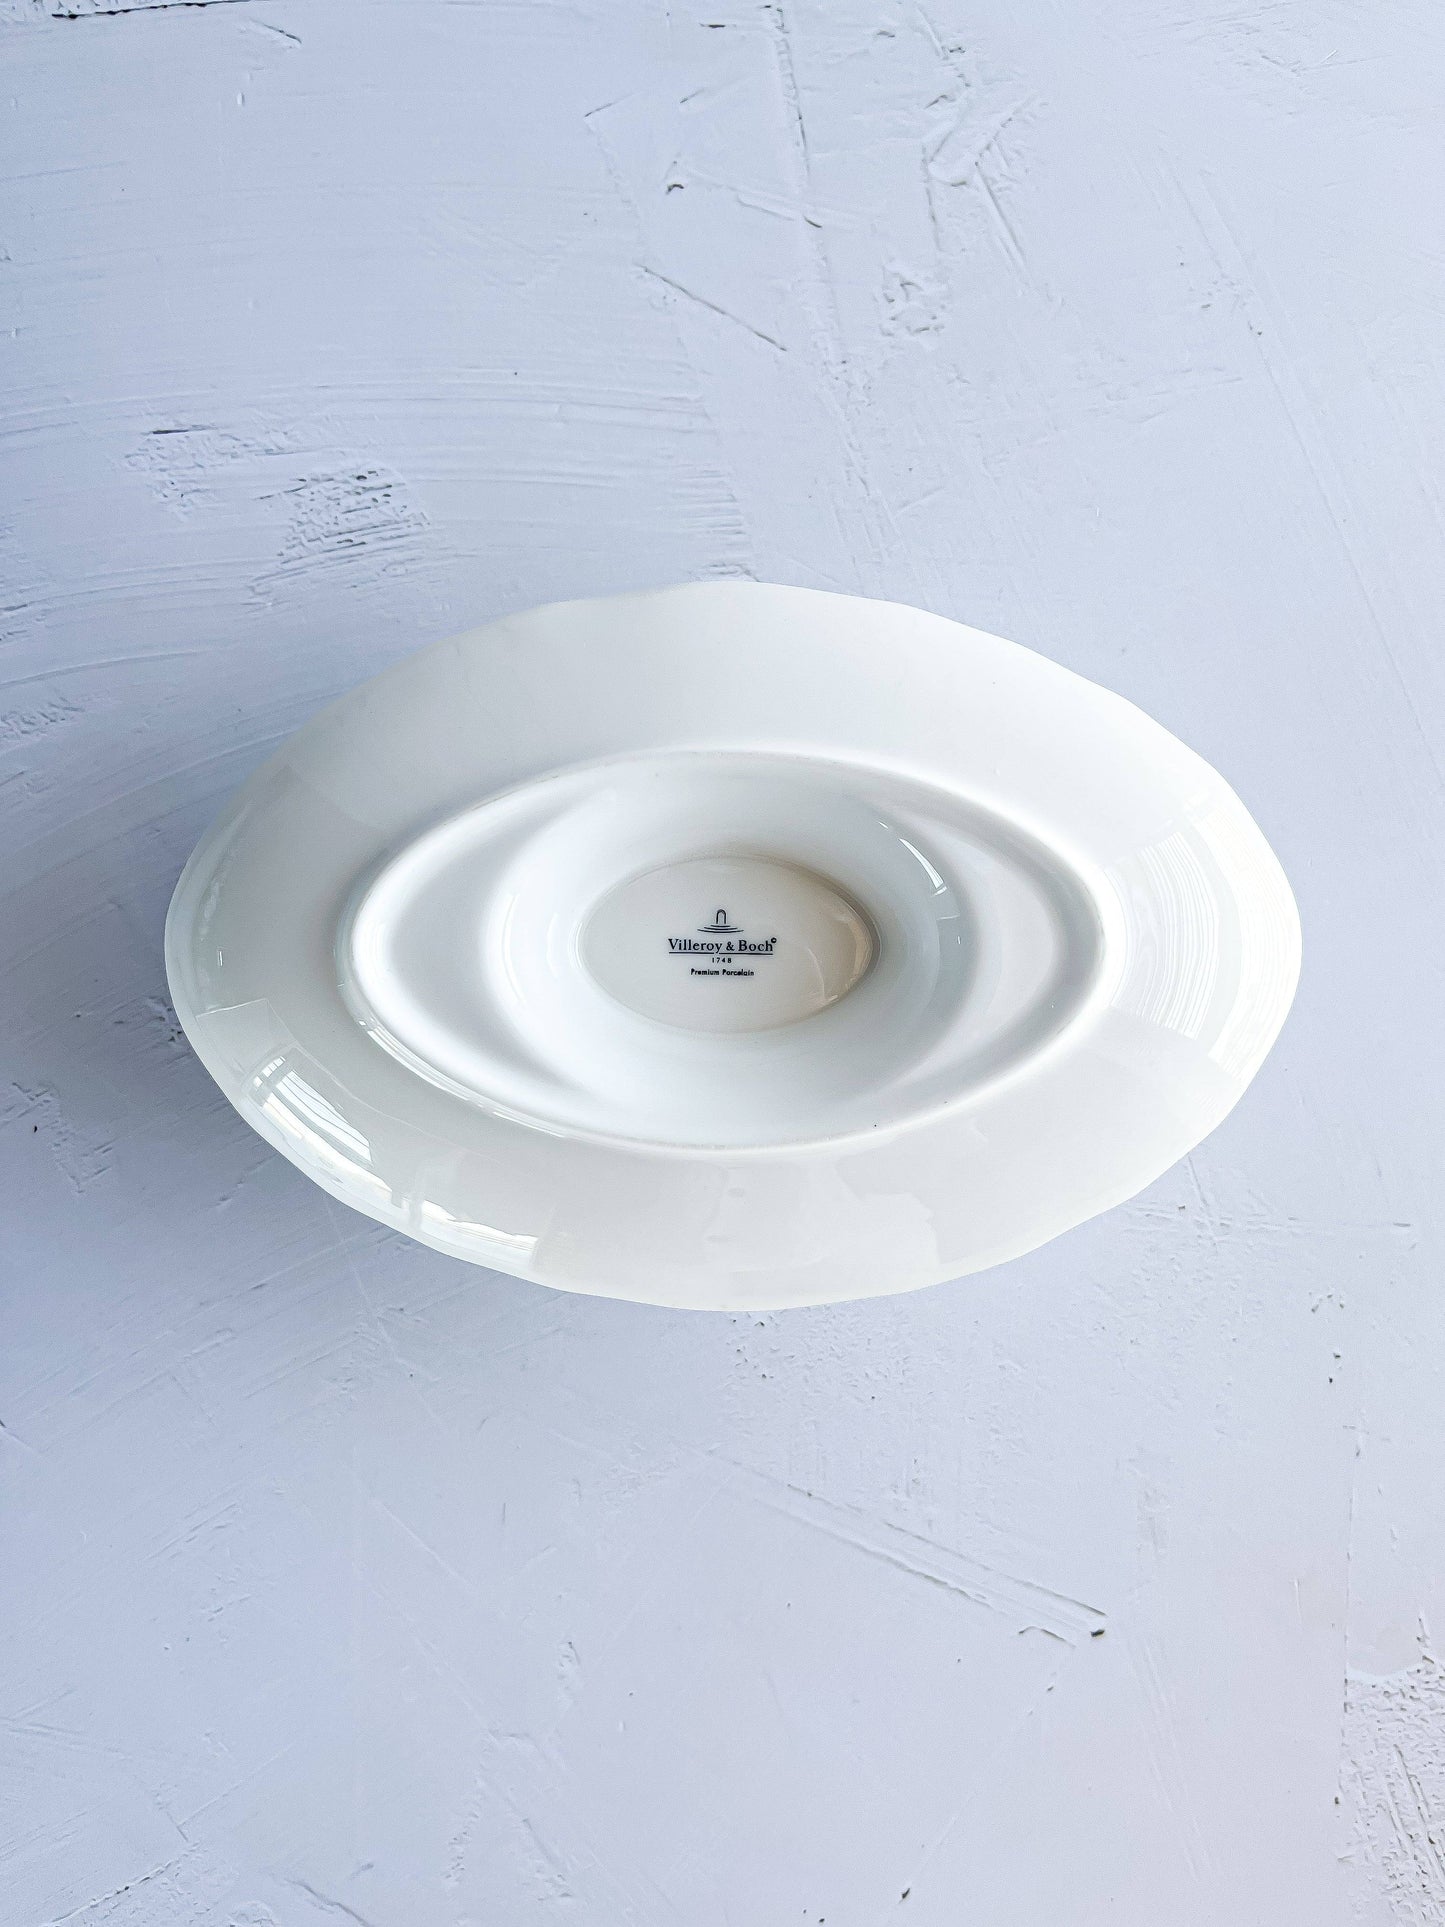 Villeroy & Boch 'Vieux Luxembourg' Sauceboat with Attached Saucer - SOSC Home